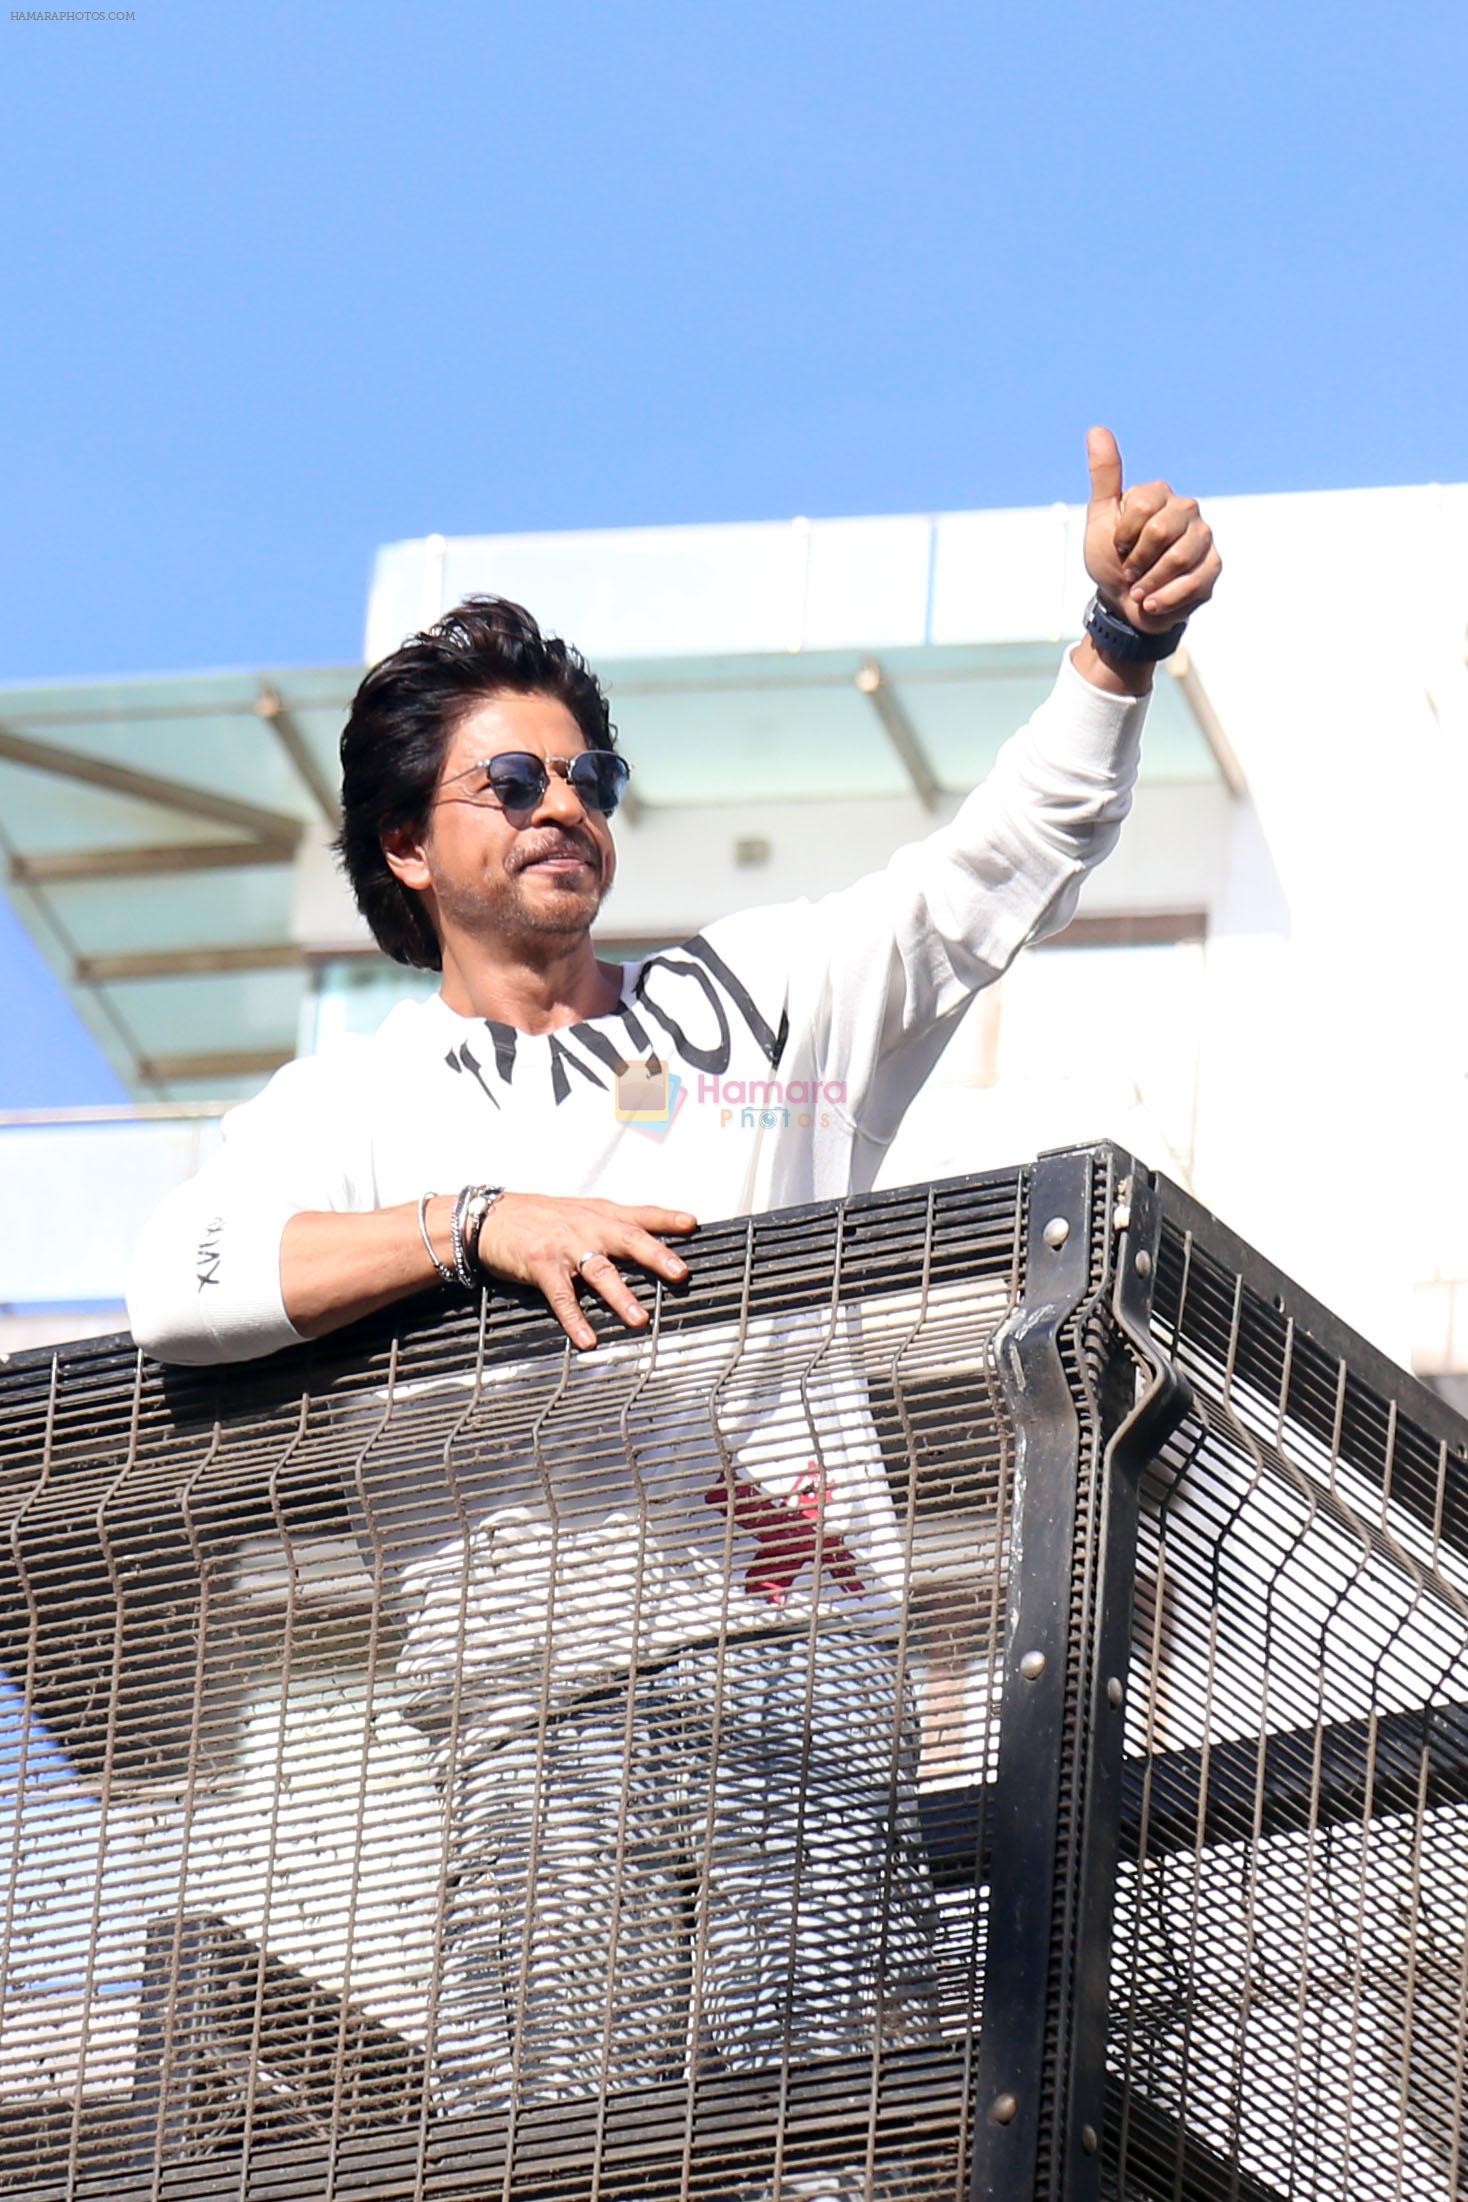 Shah Rukh Khan pose in celebration of the world TV premiere of his film Pathan